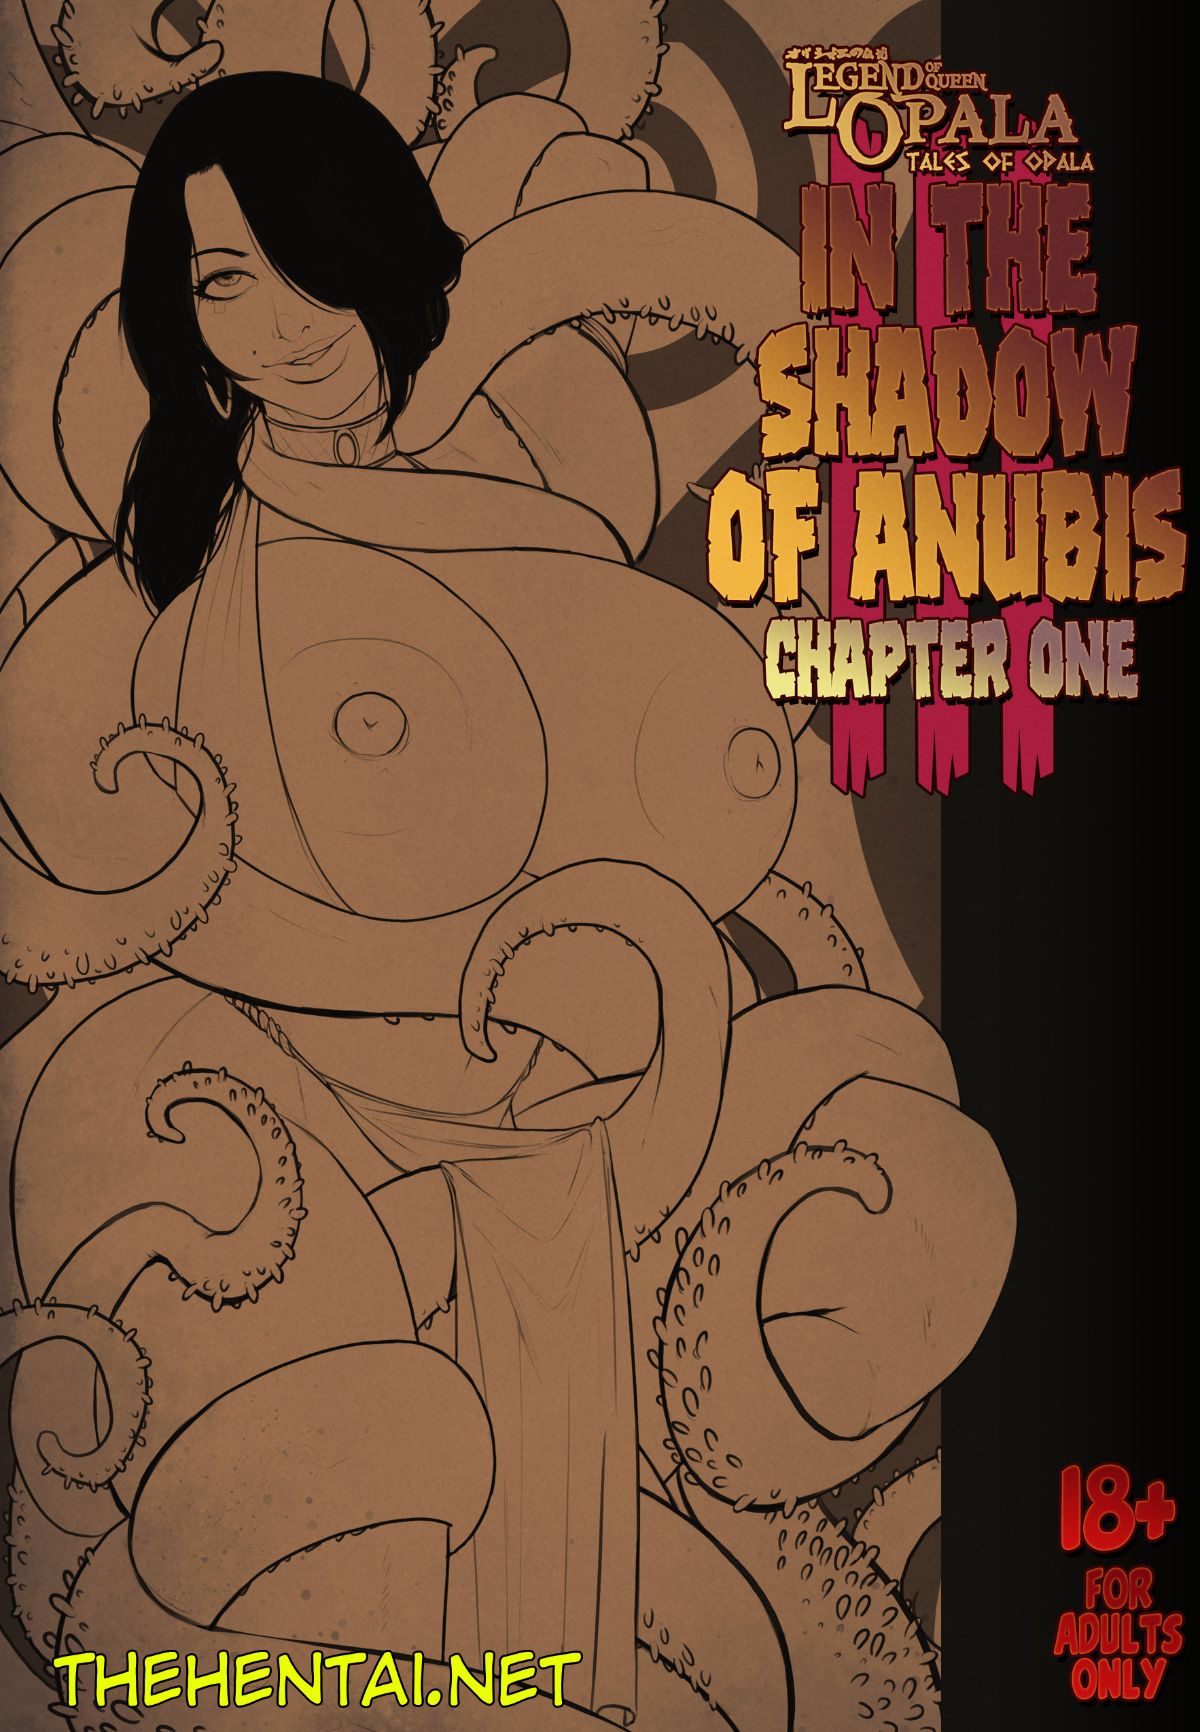 In the Shadow of Anubis 3 Ch 1 Hentai pt-br 01